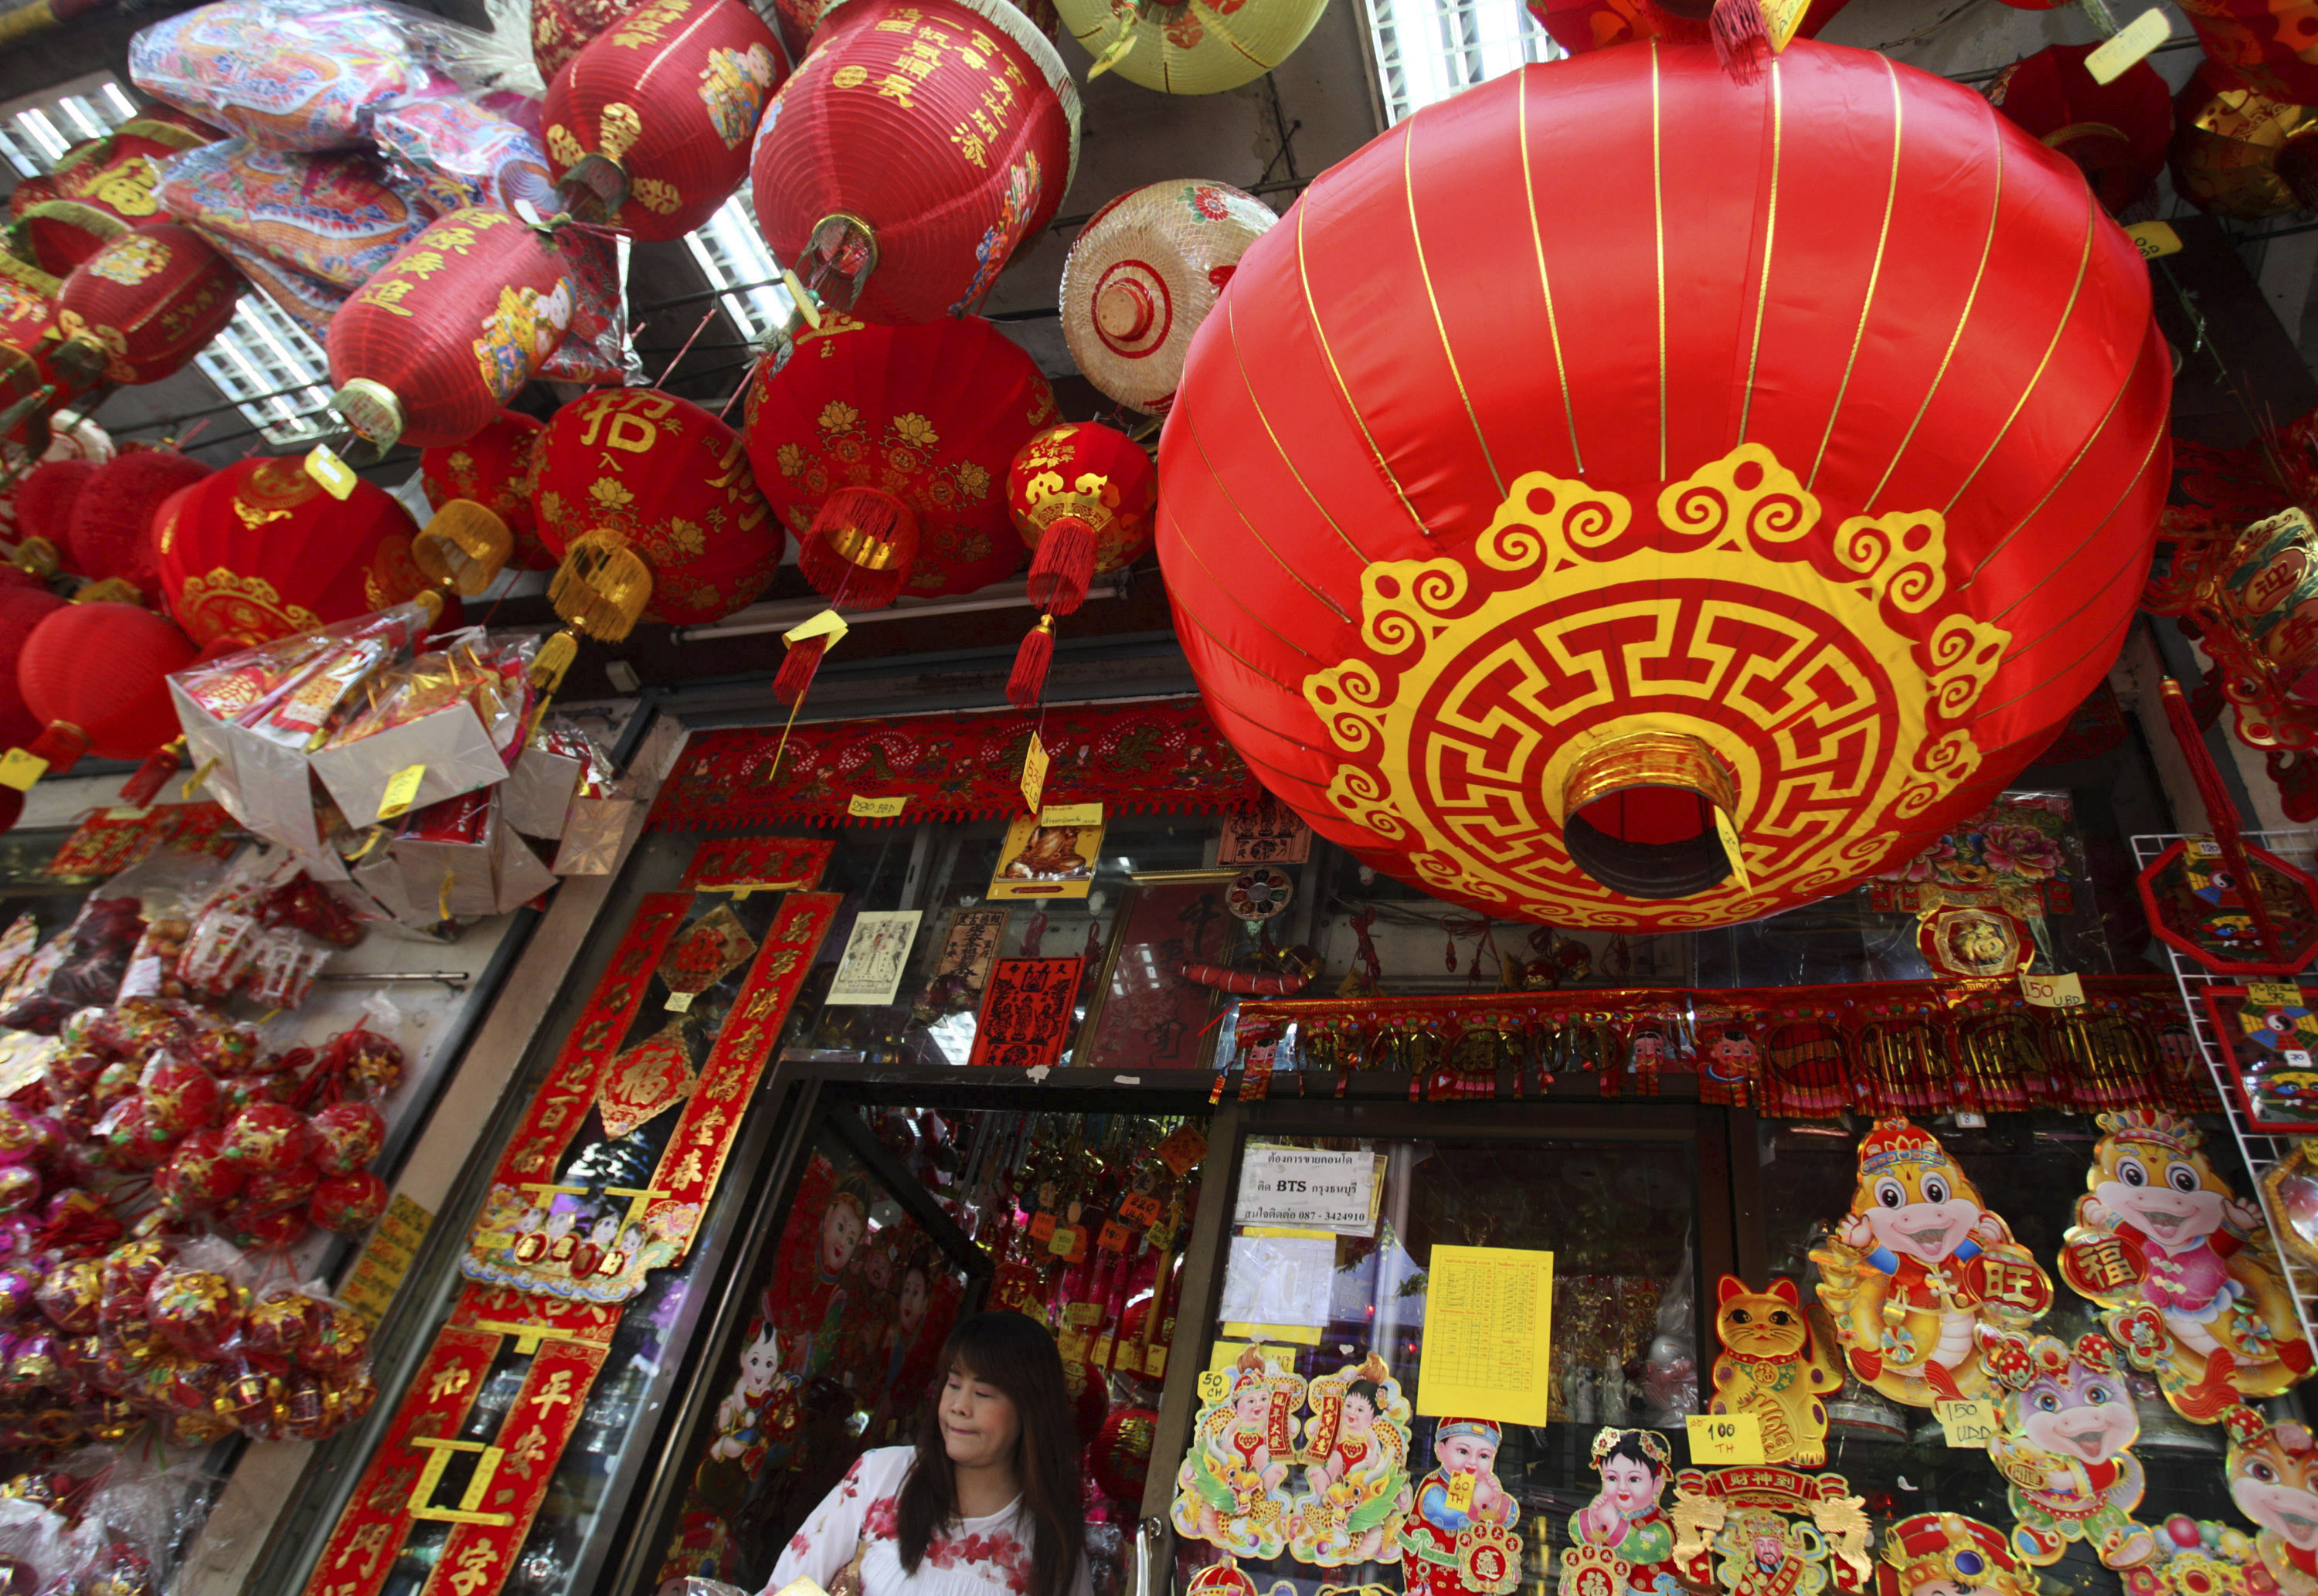 Lunar New Year 2024: All you need to know